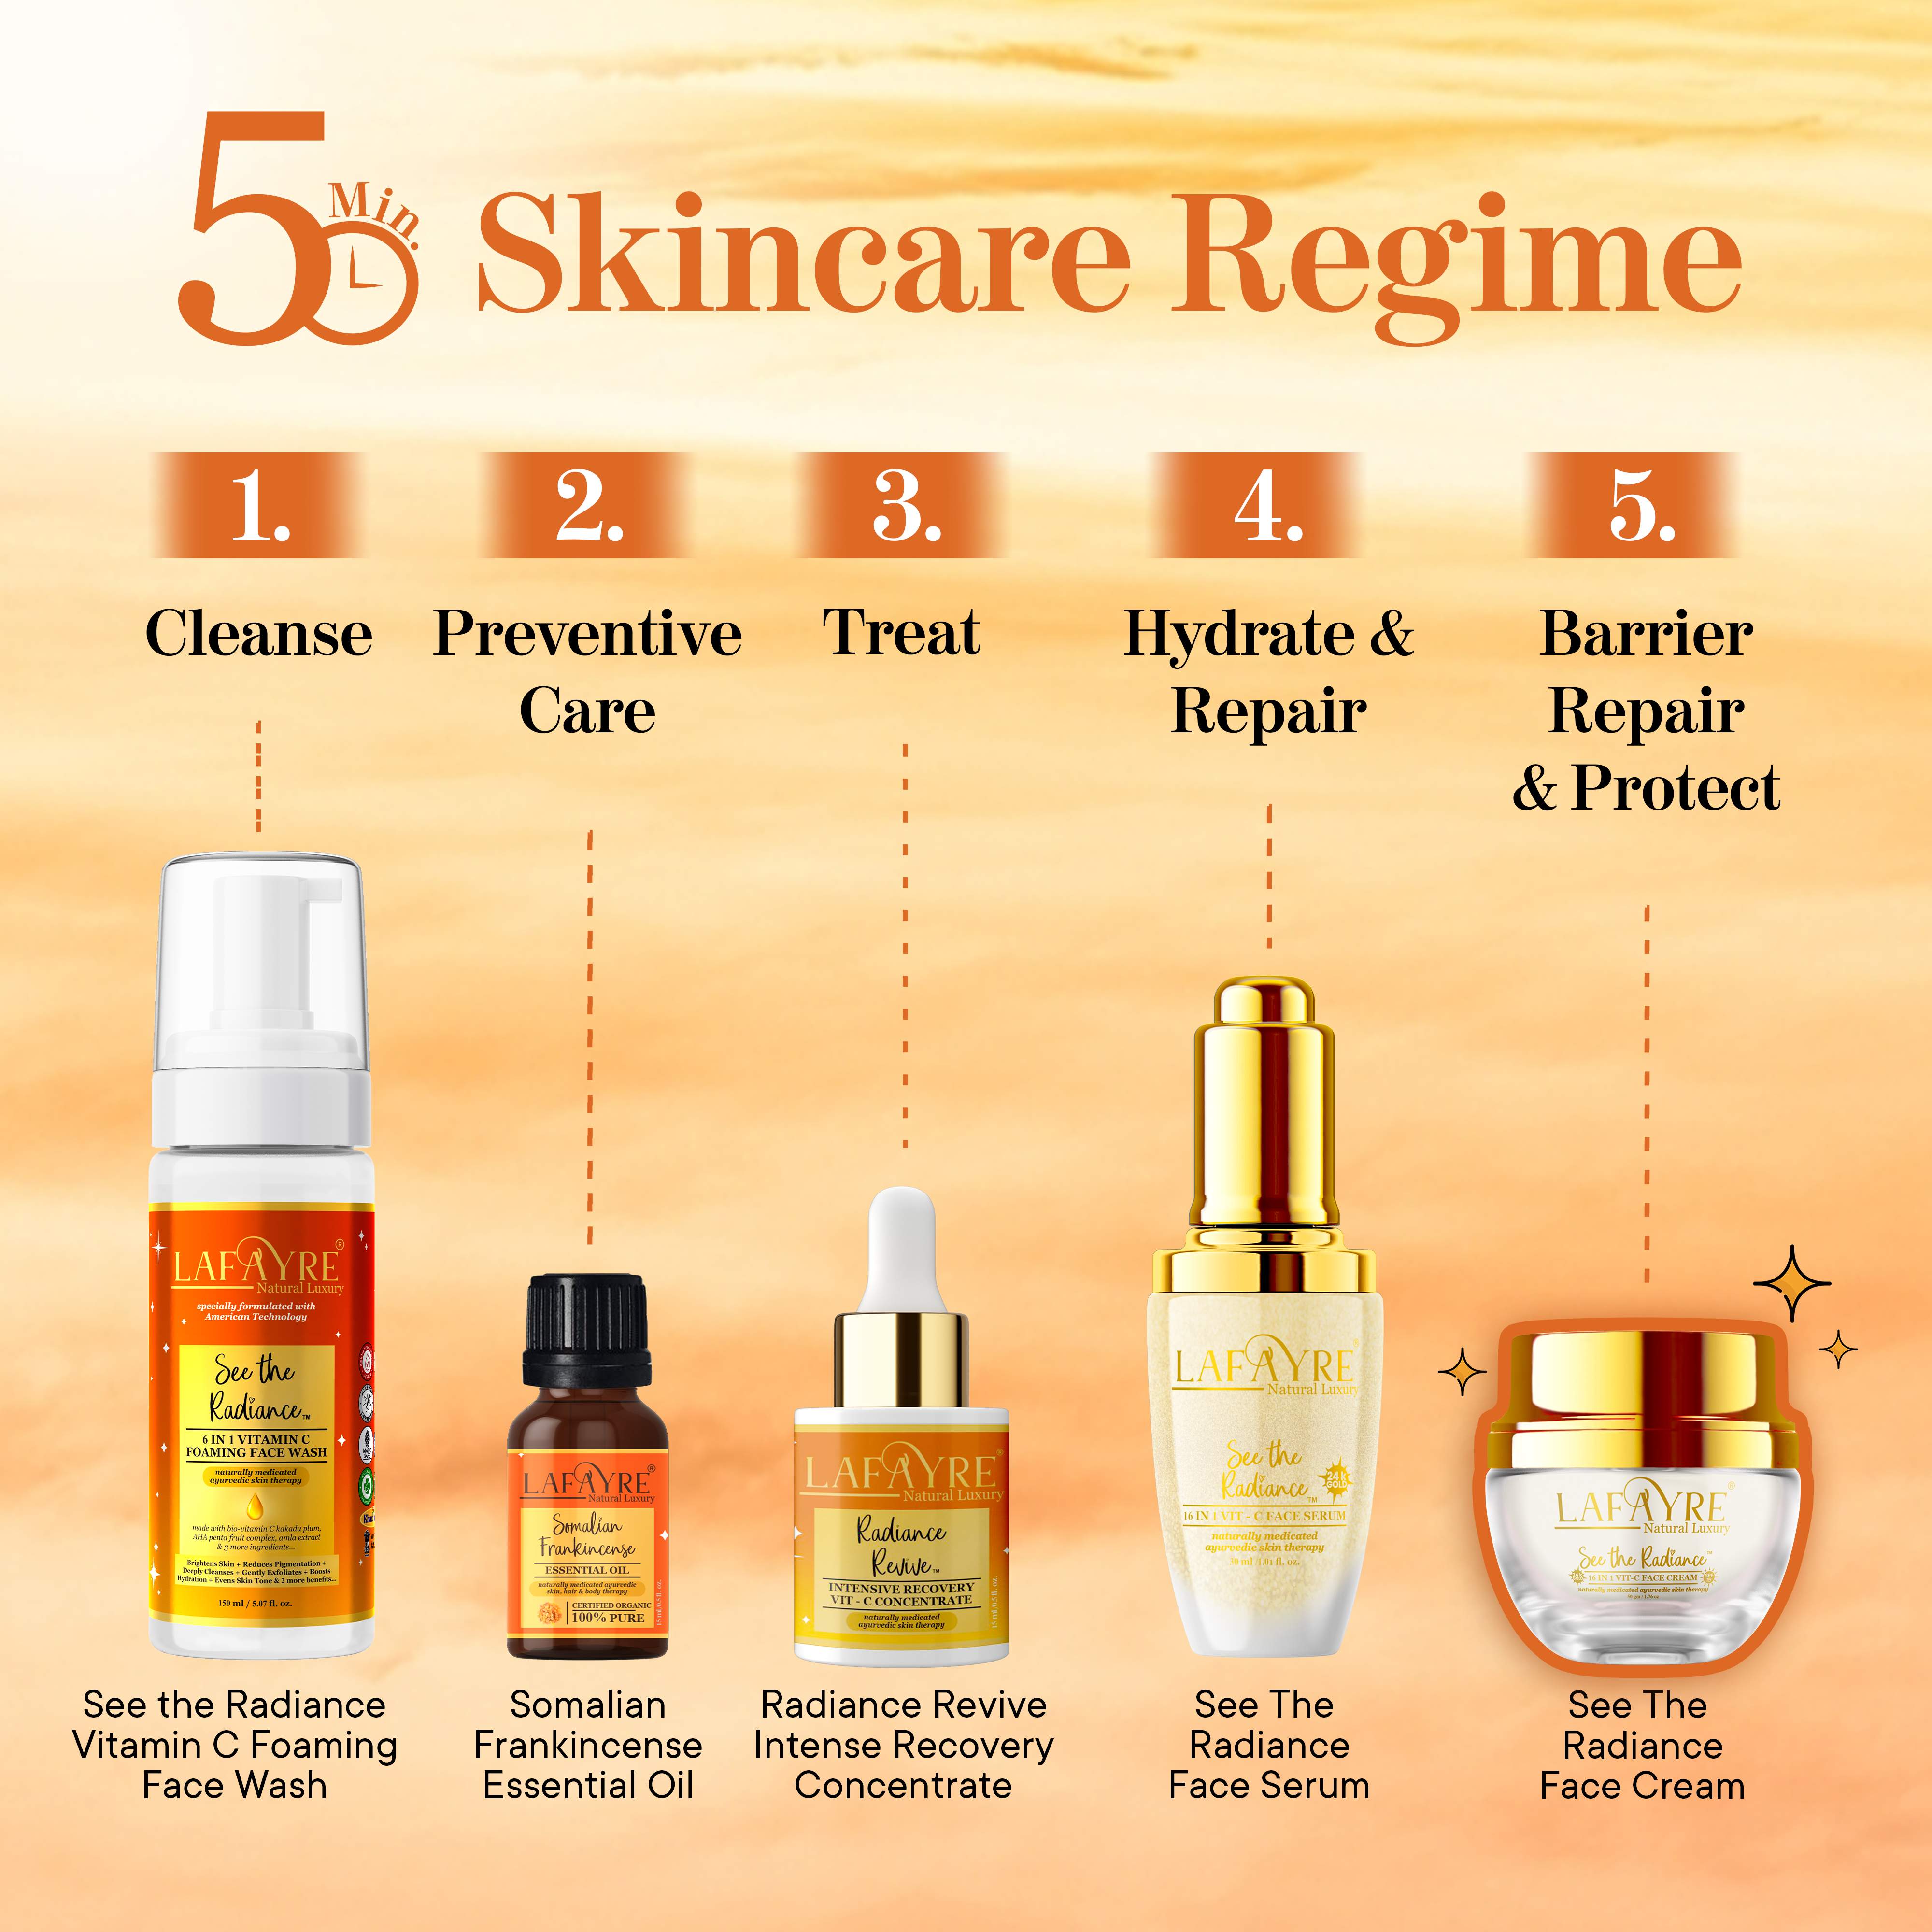 See the Radiance Face Cream Regime